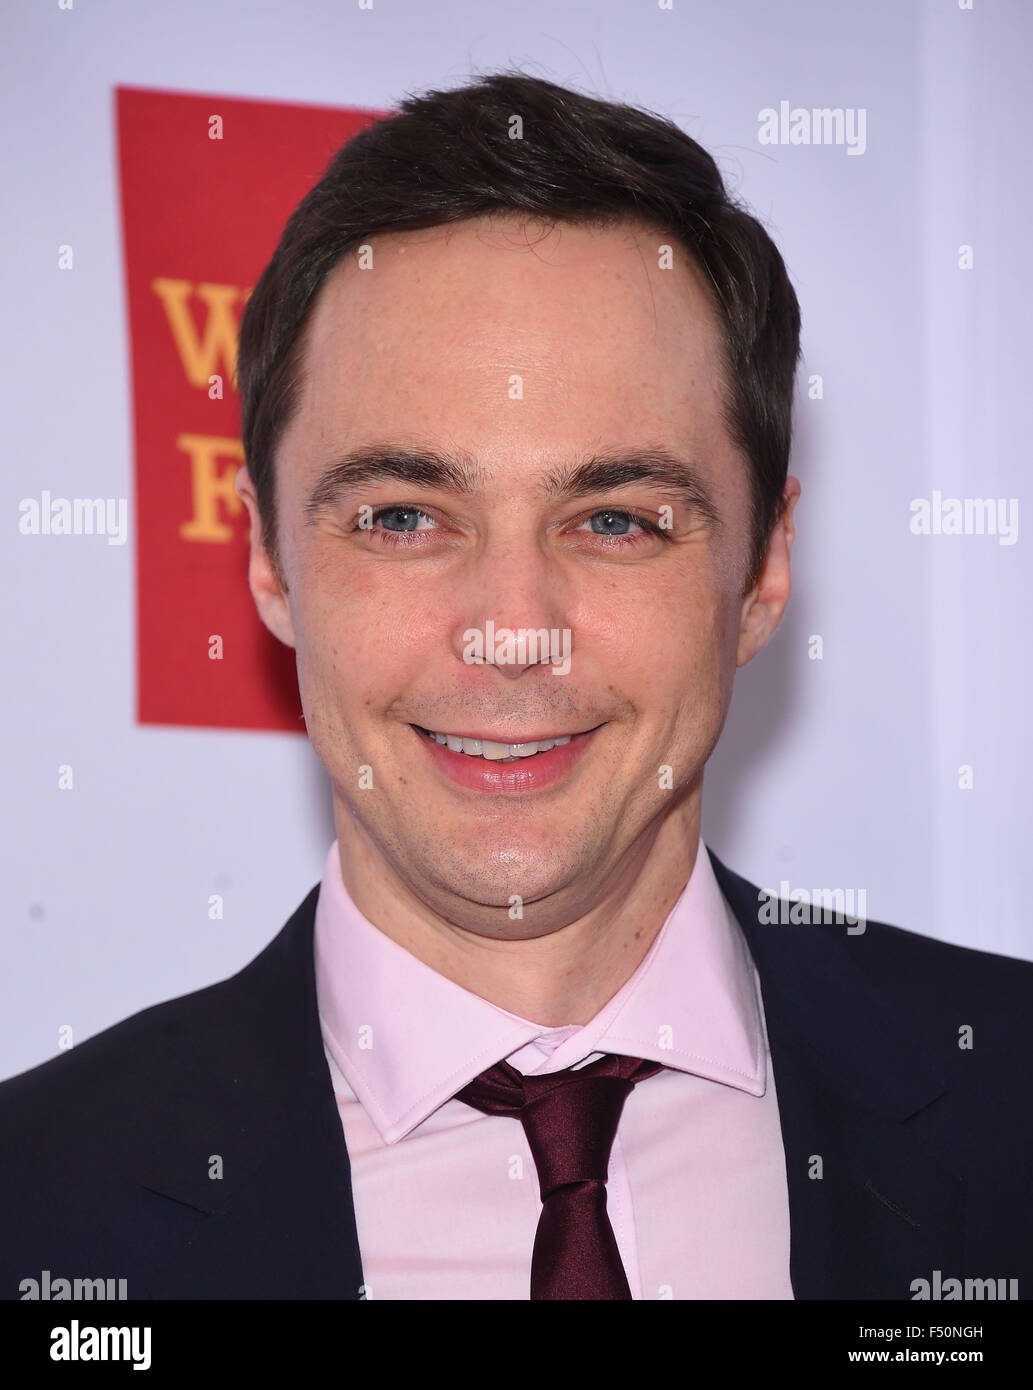 Beverly Hills, California, USA. 23rd Oct, 2015. Jim Parsons arrives for the GLSEN Awards and Gala held at the Wilshire Hotel. © Lisa O'Connor/ZUMA Wire/Alamy Live News Stock Photo